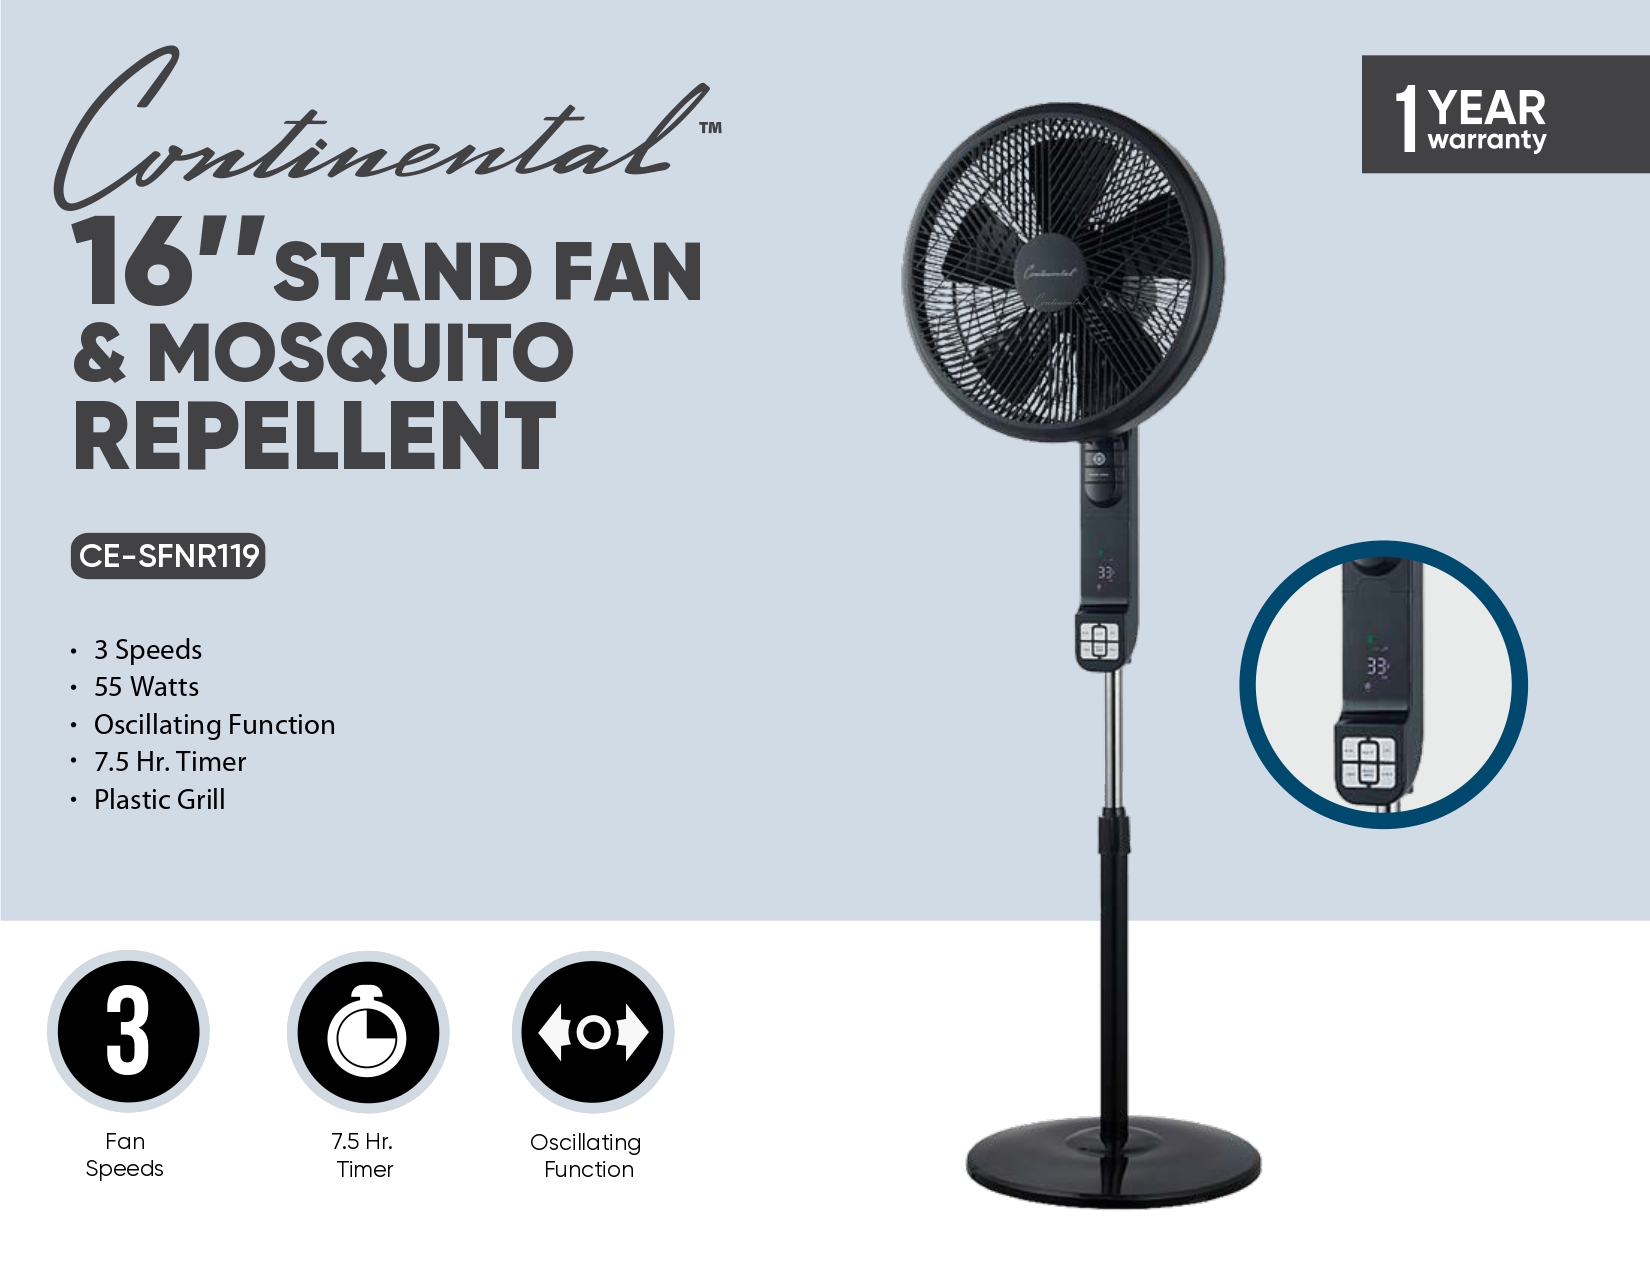 16’’ STAND FAN & MOSQUITO REPELLENT